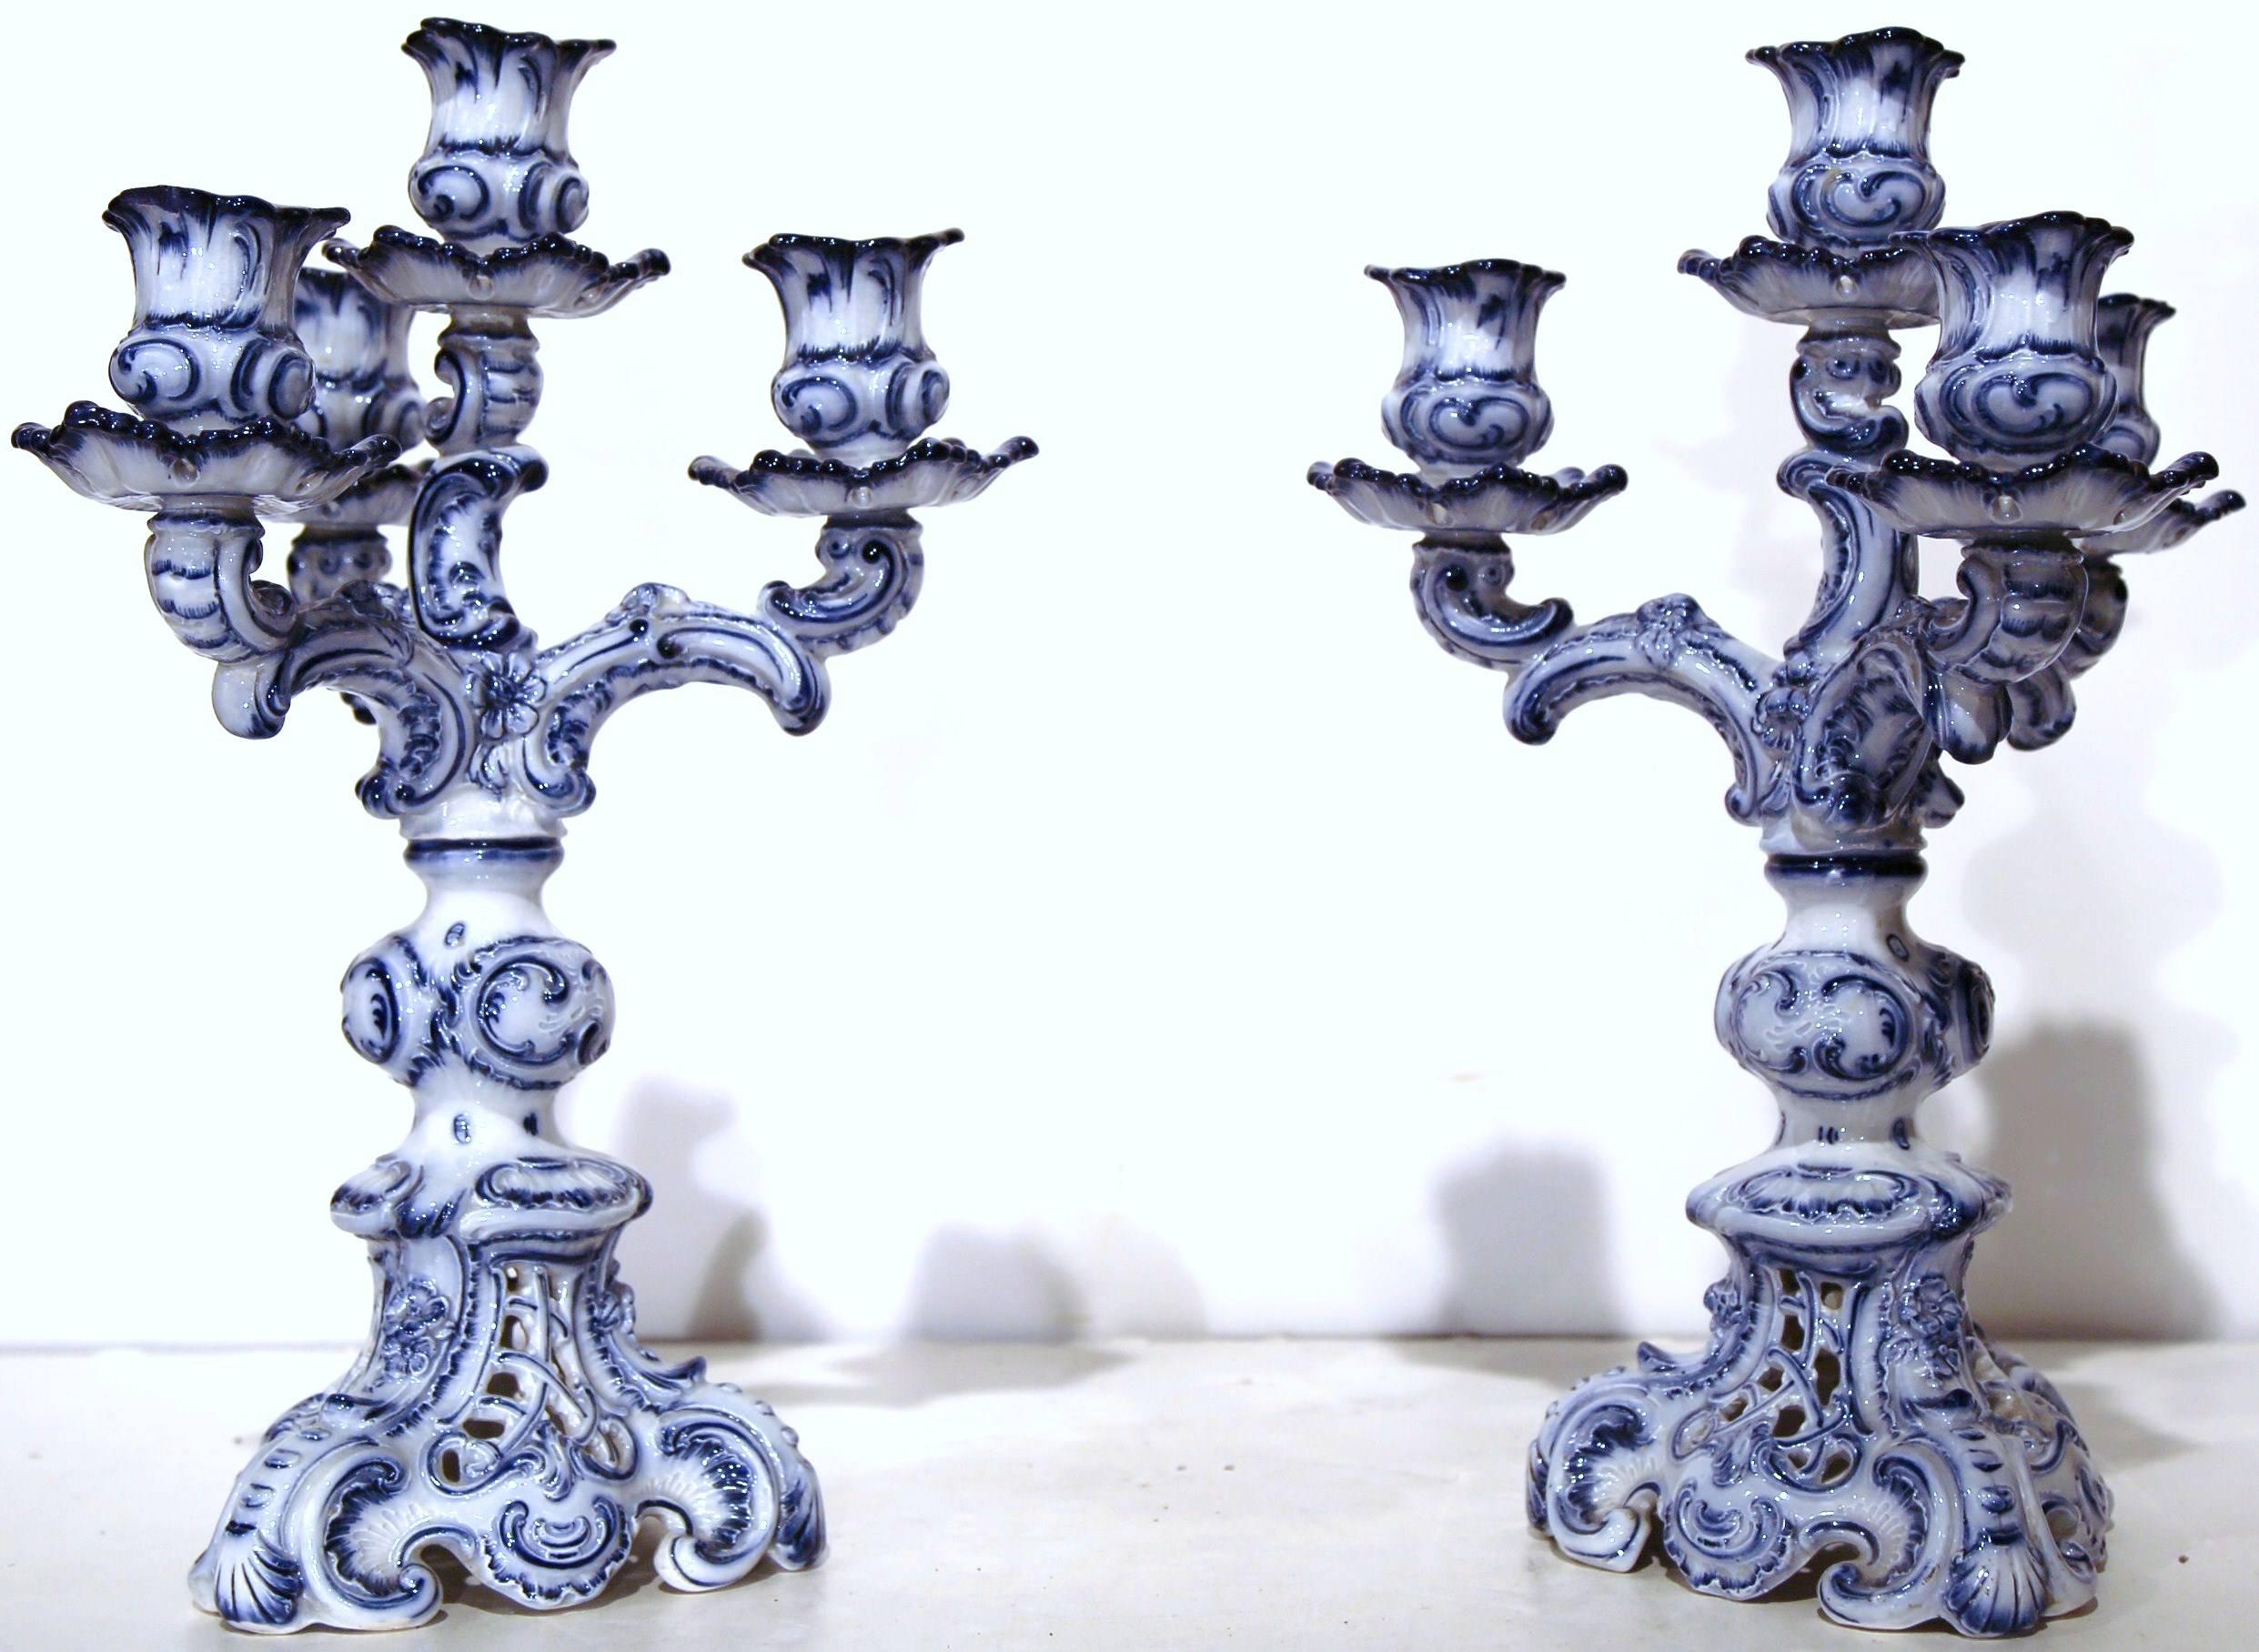 Decorate a table or mantel with this Classic pair of porcelain candleholders. Sculpted in France, circa 1920, the antique candelabras stand on small scroll feet, with three outside arms and one elevated in the center. Traditional and blending with